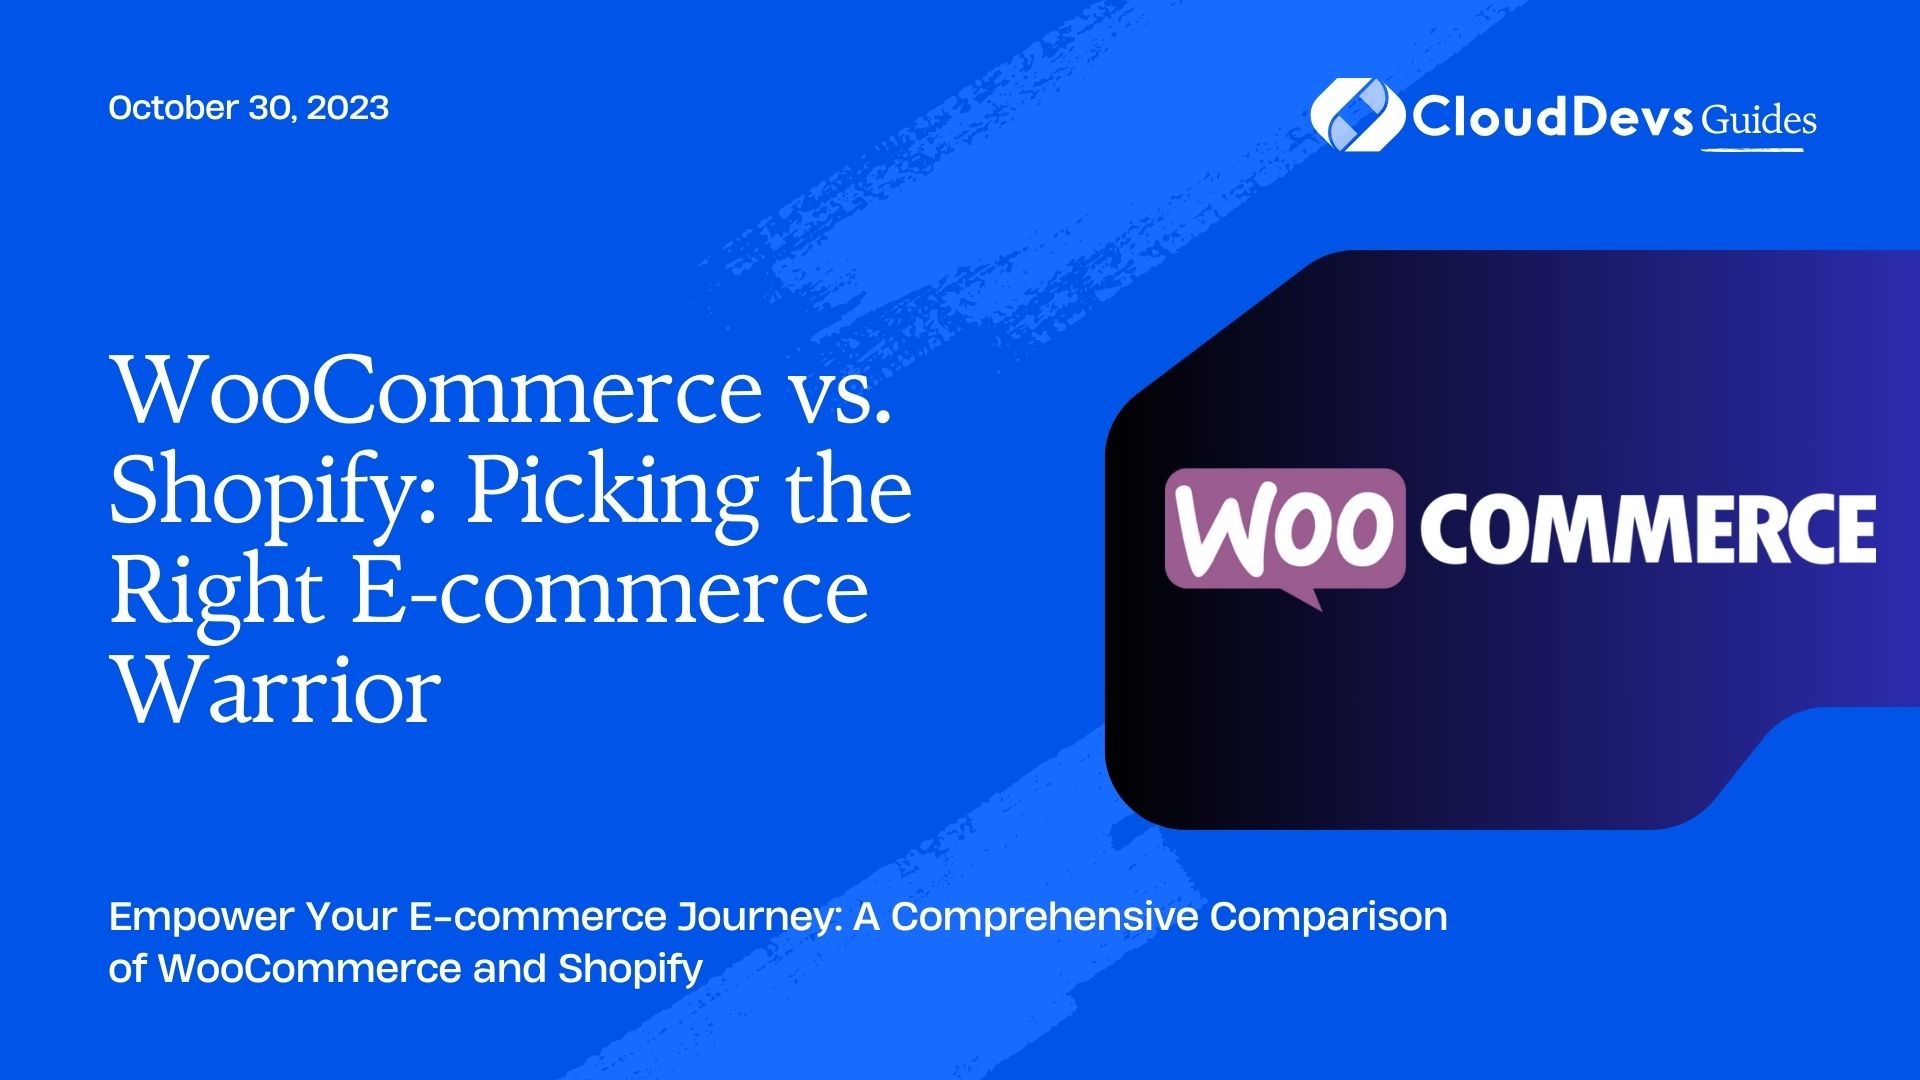 WooCommerce vs. Shopify: Picking the Right E-commerce Warrior